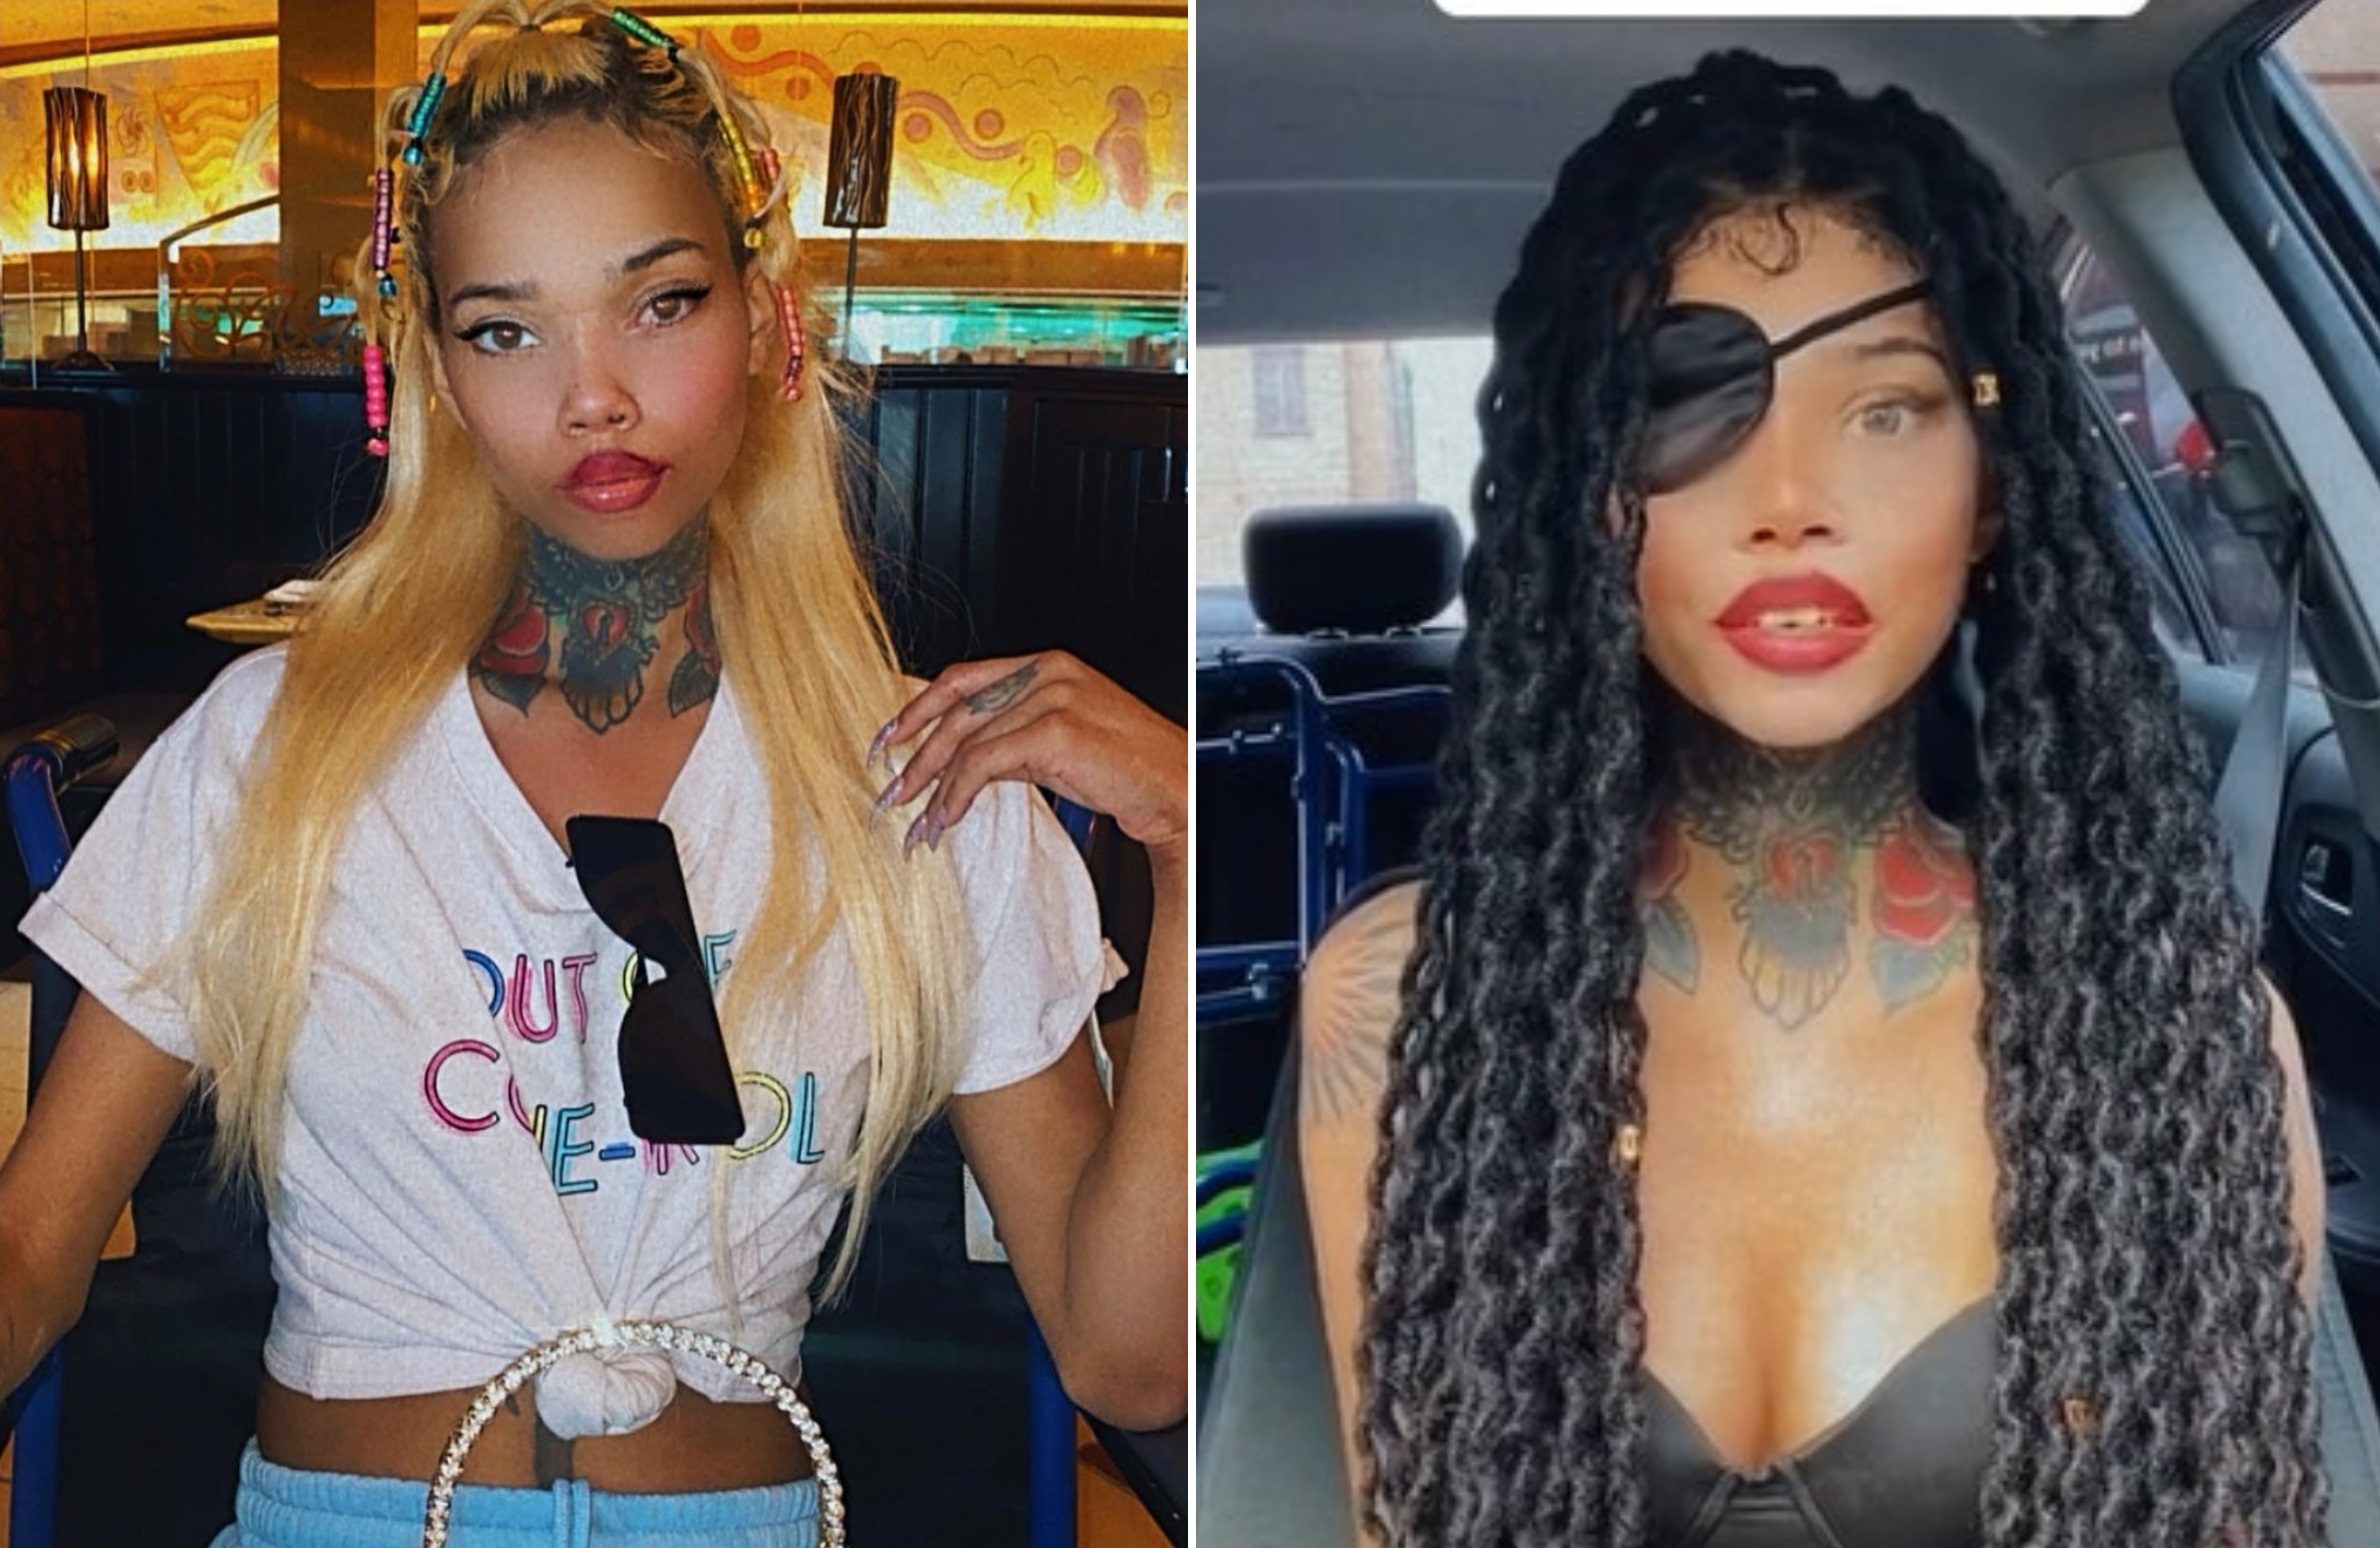 Instagram model reveals she is going blind after eye surgery following HIV diagnosis